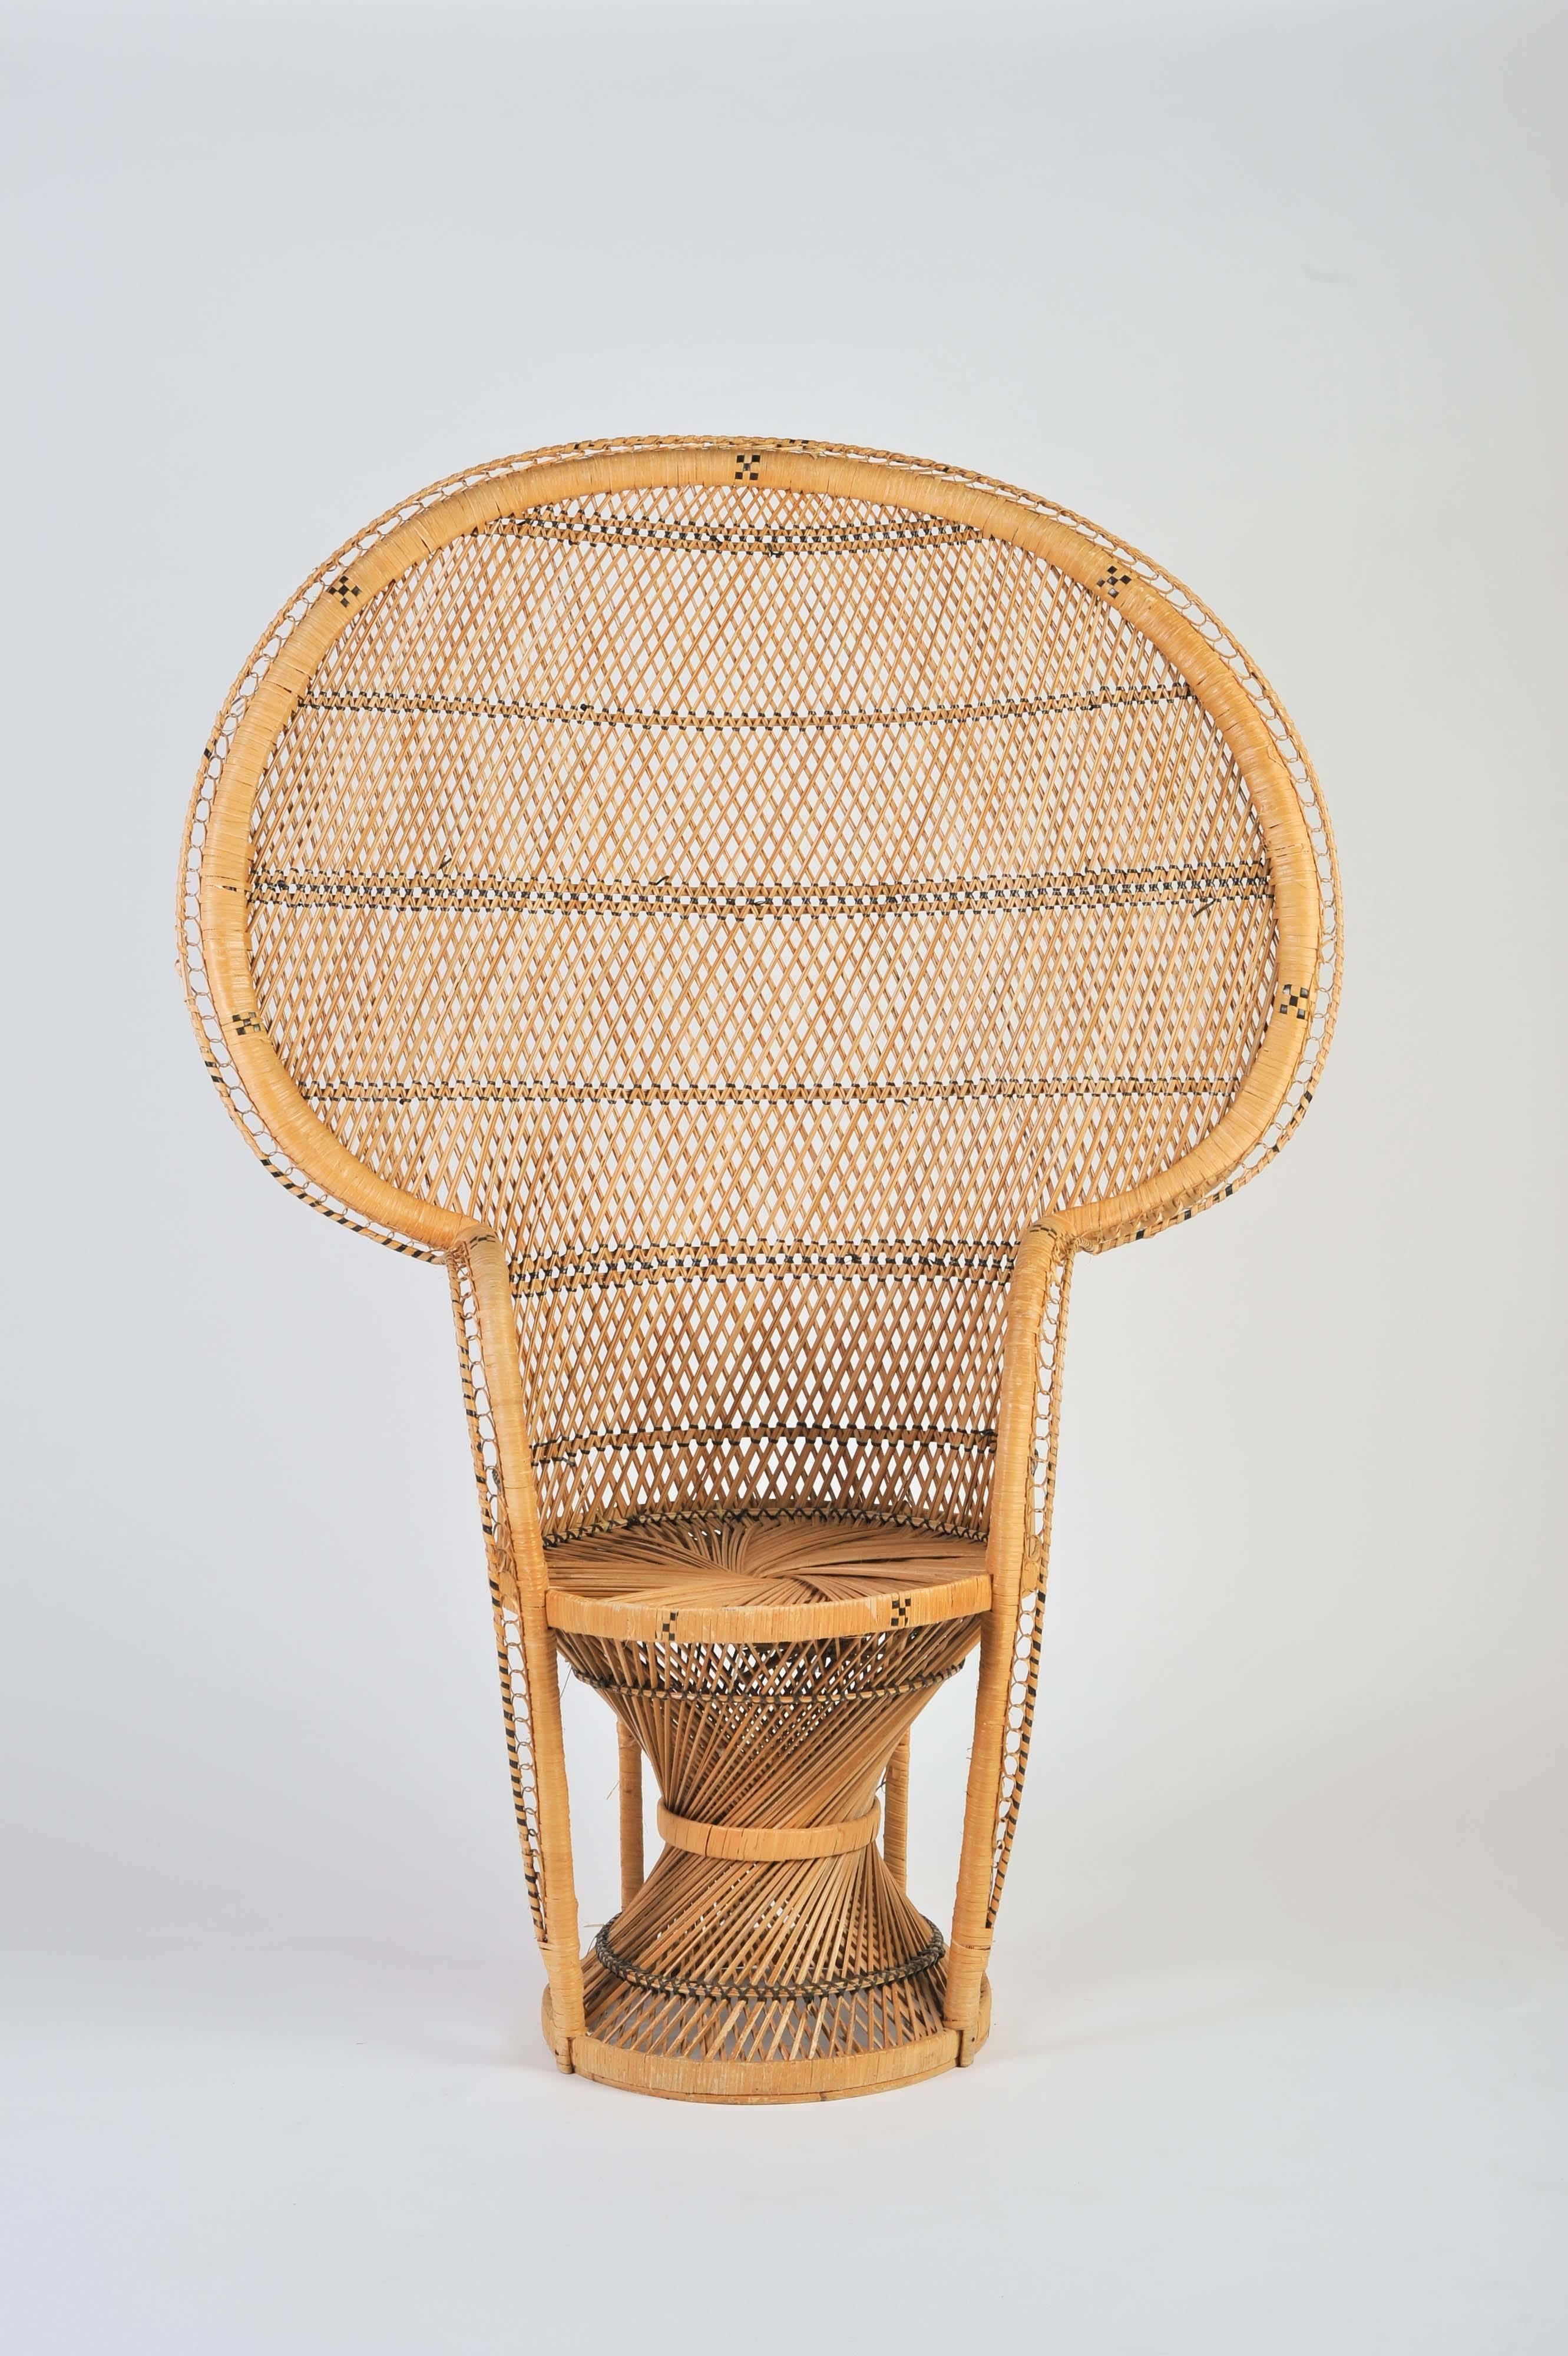 A large vintage Bohemian high-quality wicker Emmanuel/Peacock chair.
The Emmanuel/Peacock chair made famous in the1974 by the actress Sylvia Kristel on the move 'Emmanuel'. Sylvia Kristel was sitting half naked in one of those wicker peacock chairs.